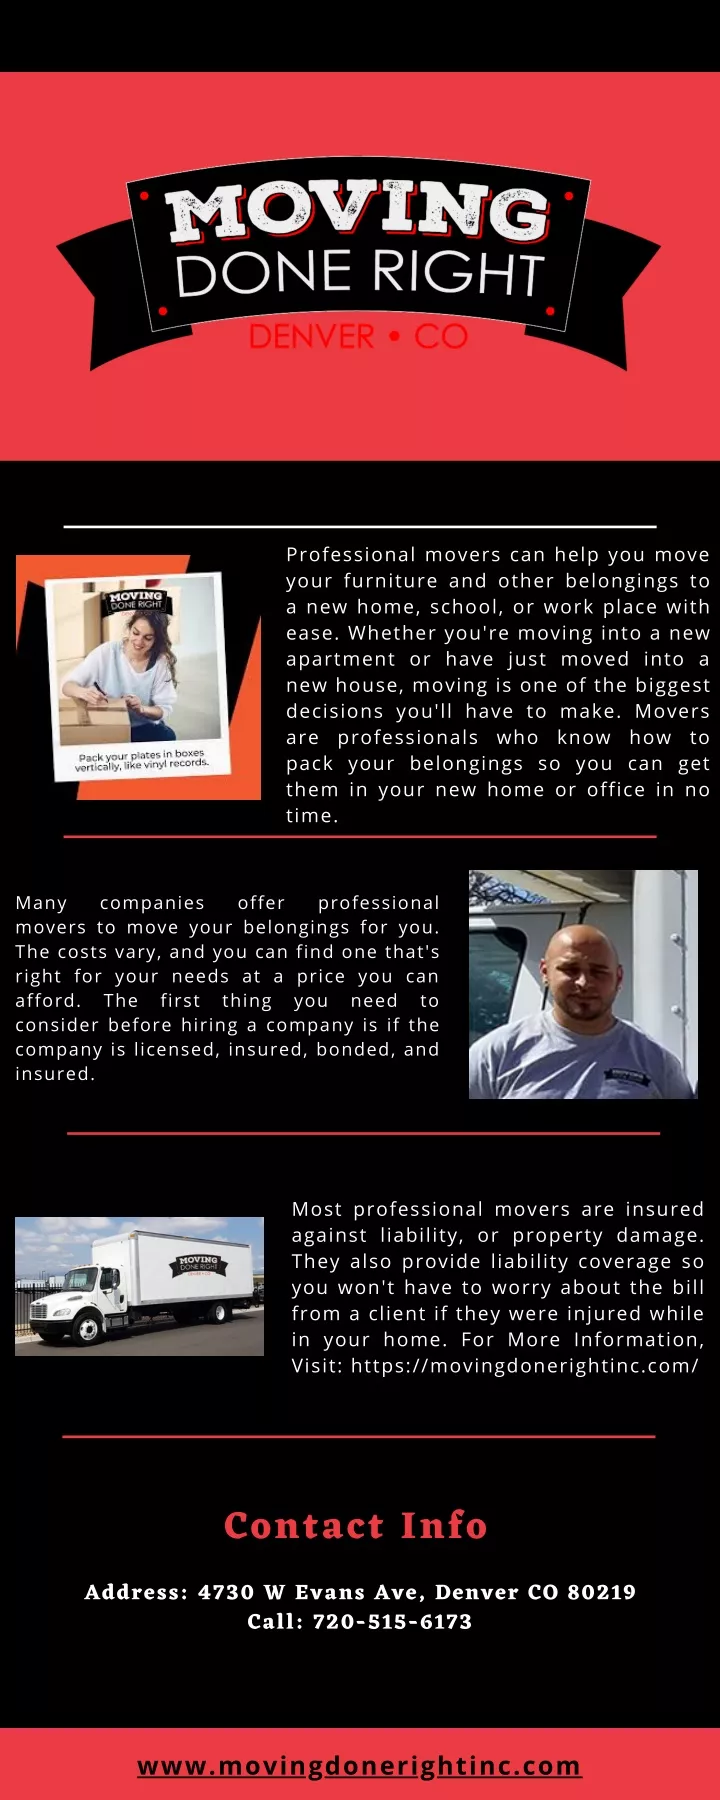 professional movers can help you move your